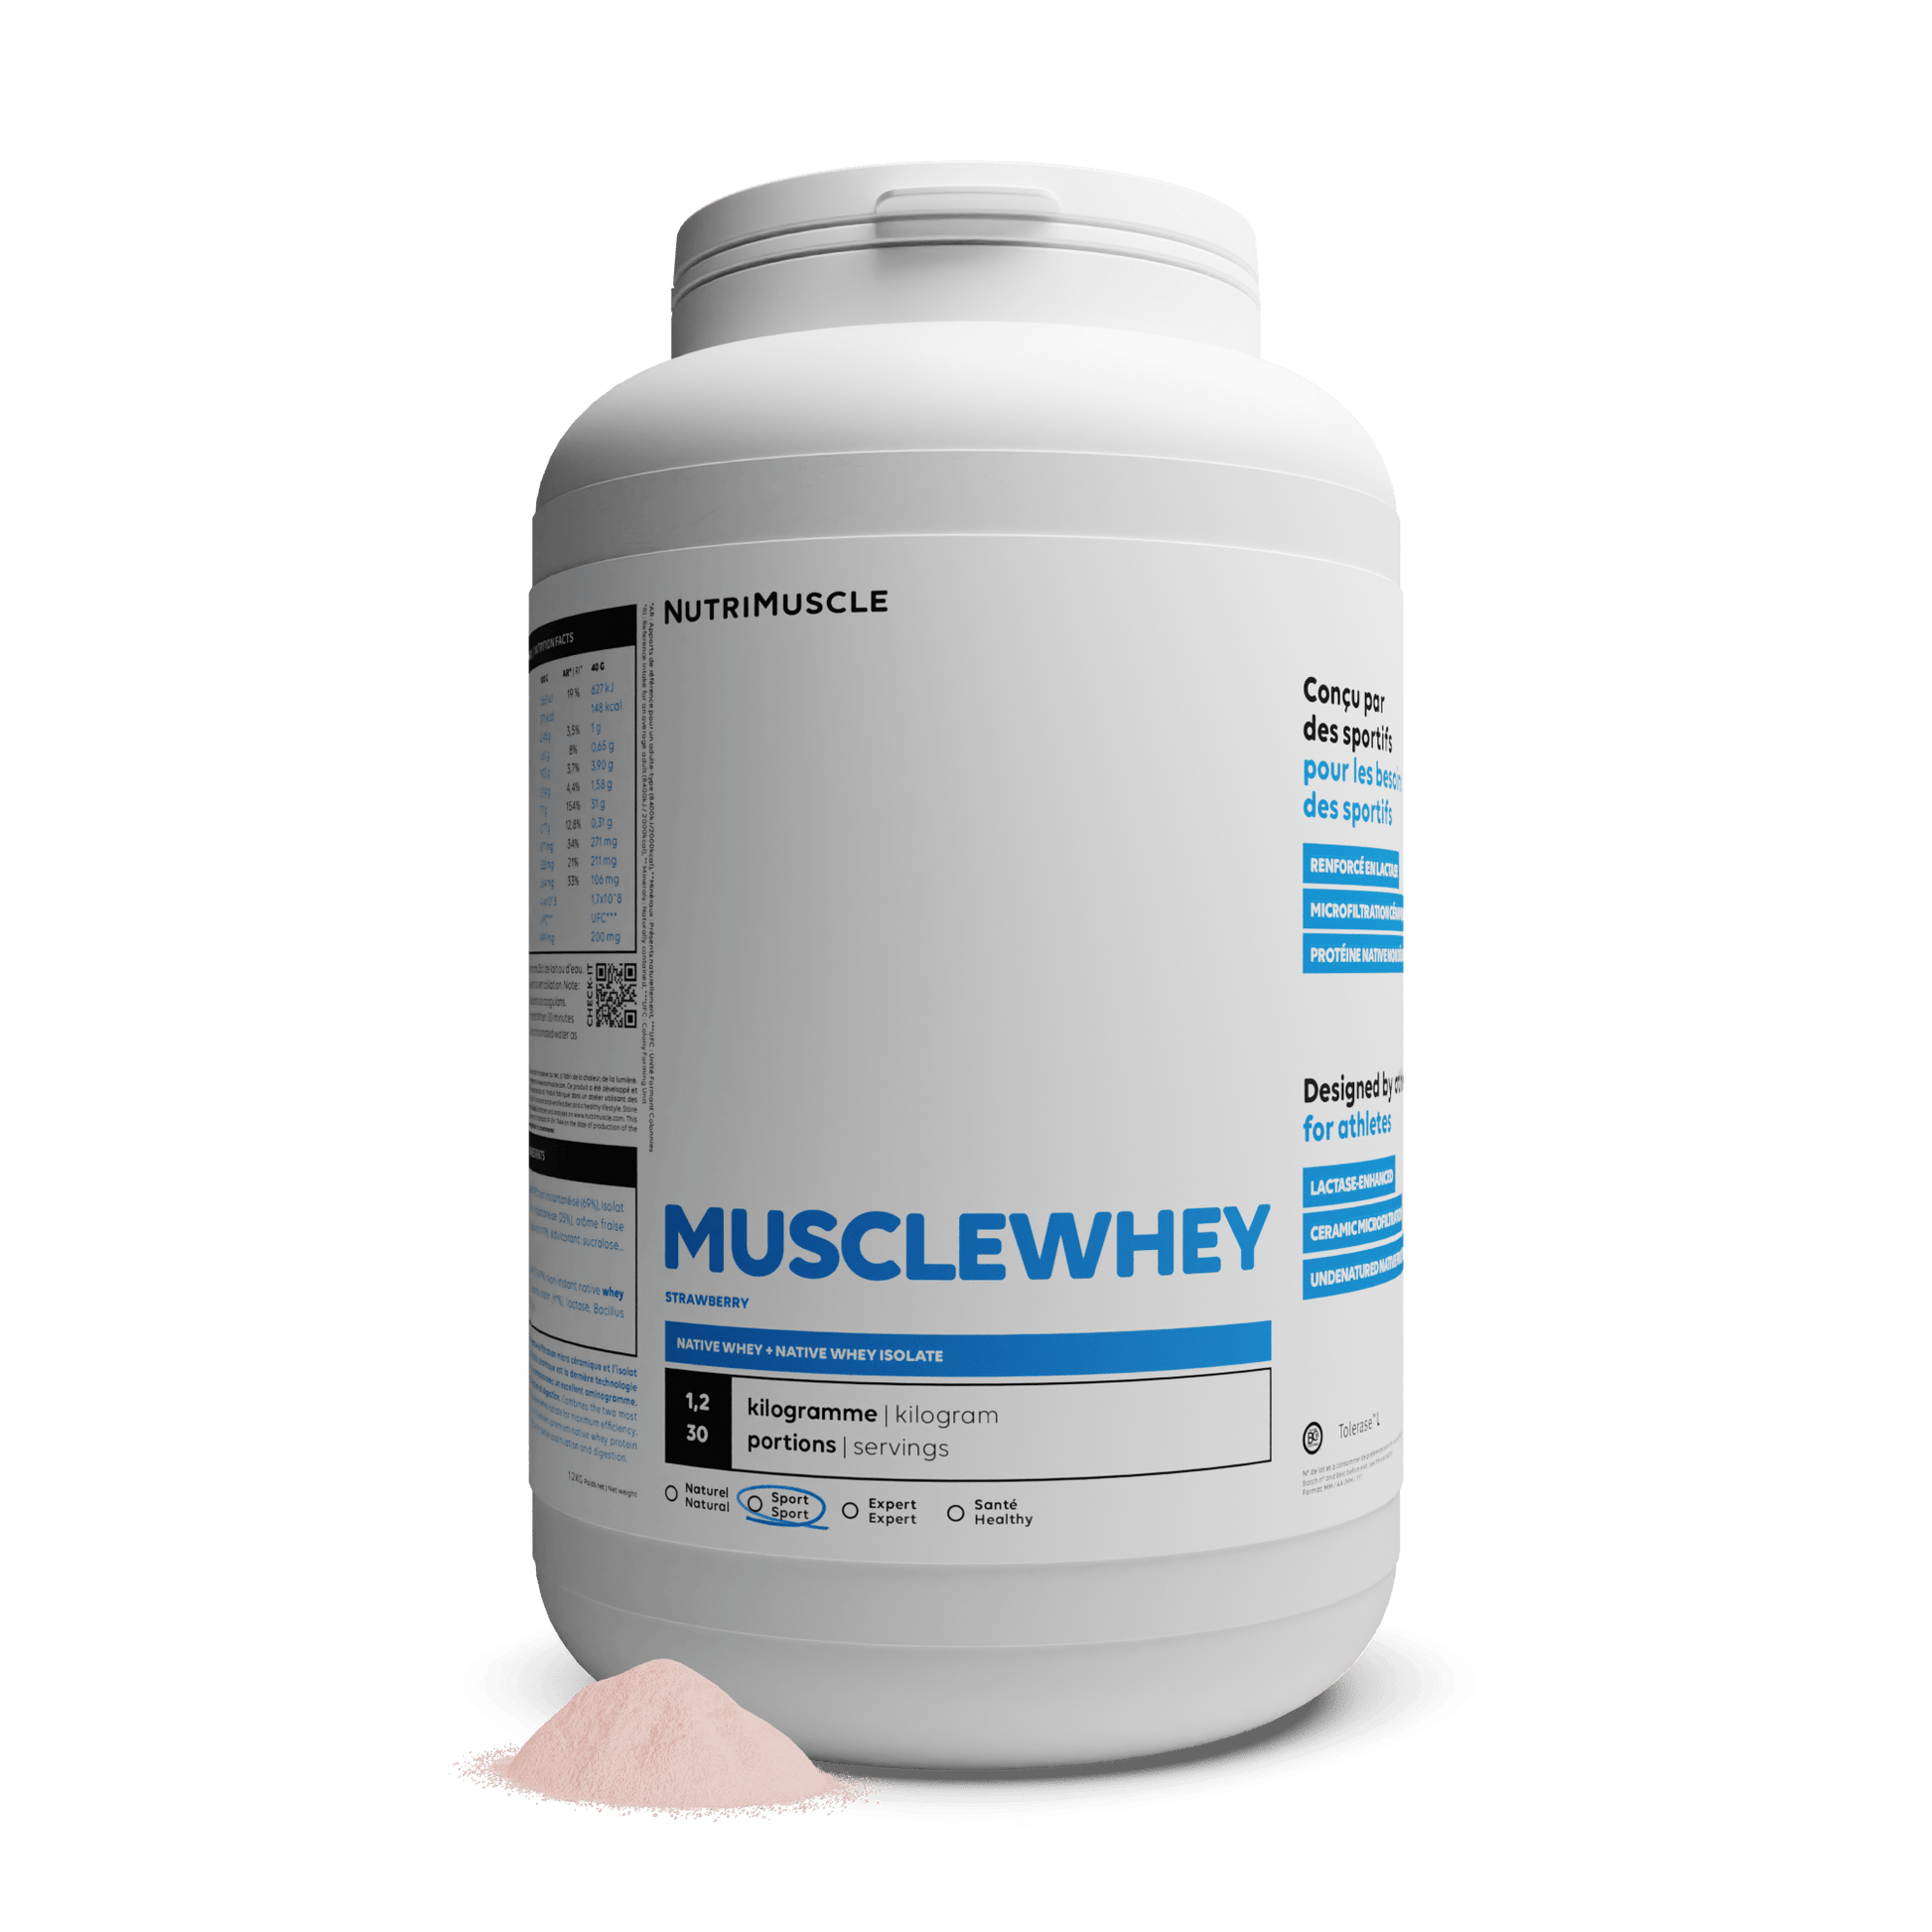 Nutrimuscle Protéines Fraise / 1.20 kg Musclewhey - Mix Protein